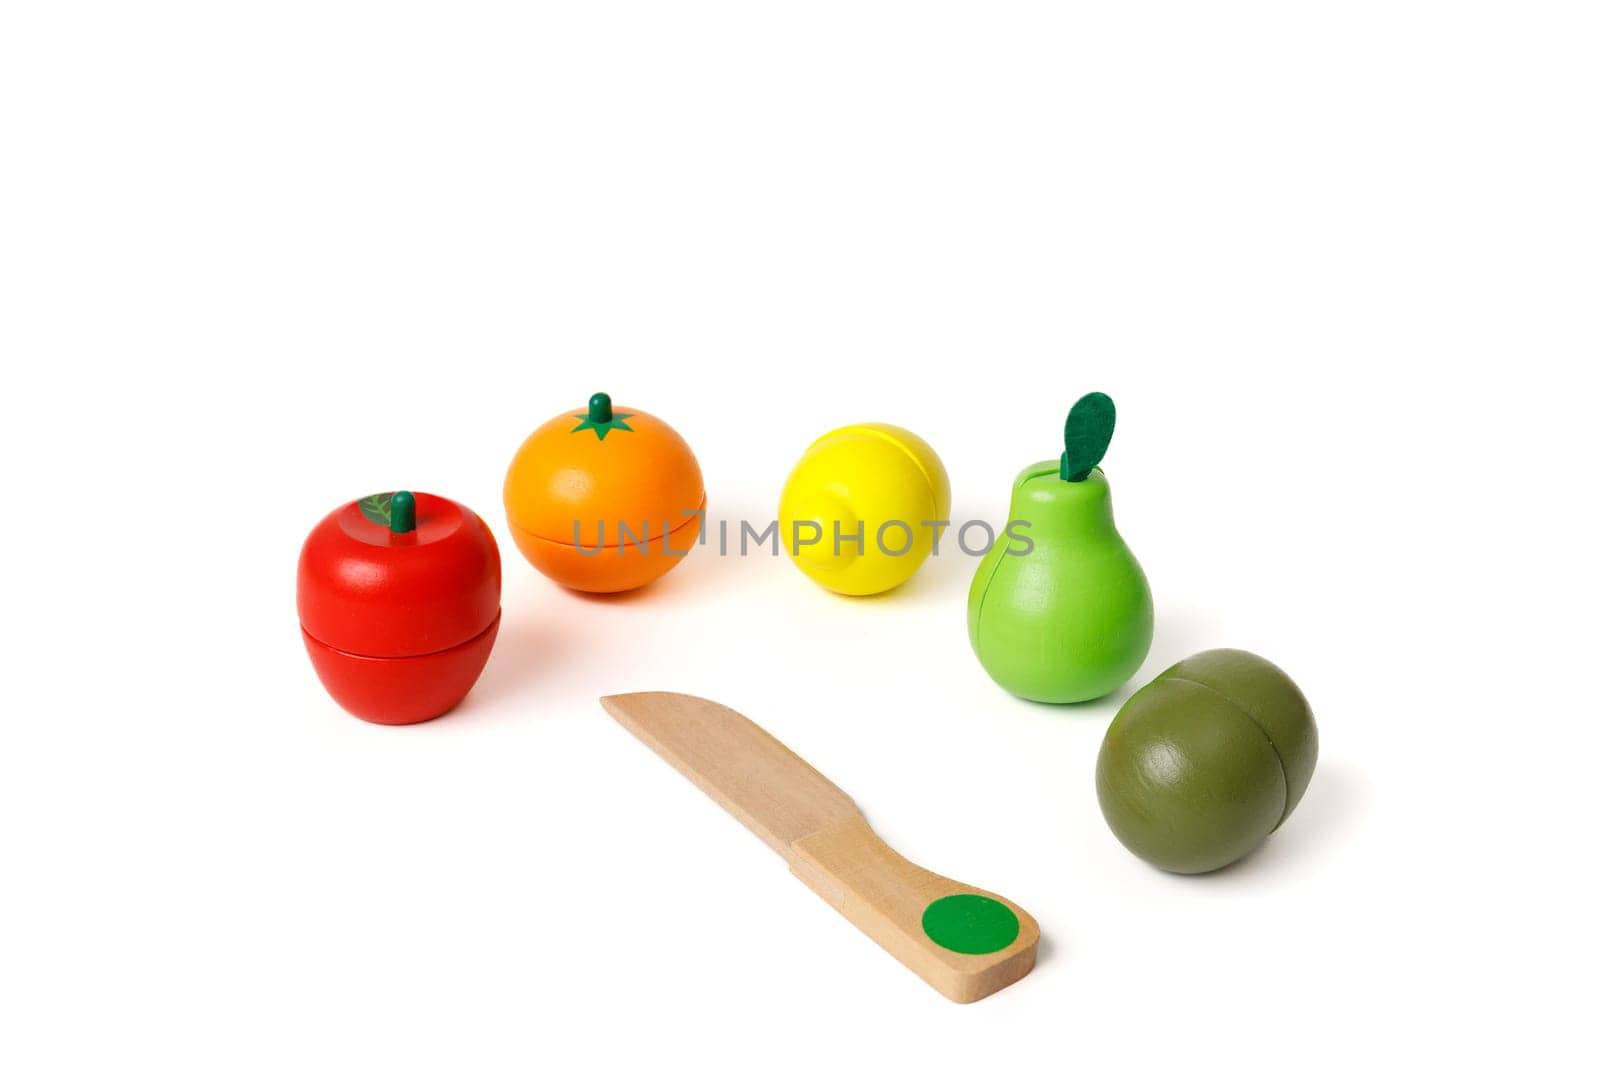 Multi-colored toys in the shape of fruits and a wooden knife for cutting these fruits. Educational games for younger preschoolers. Copy space and white background.